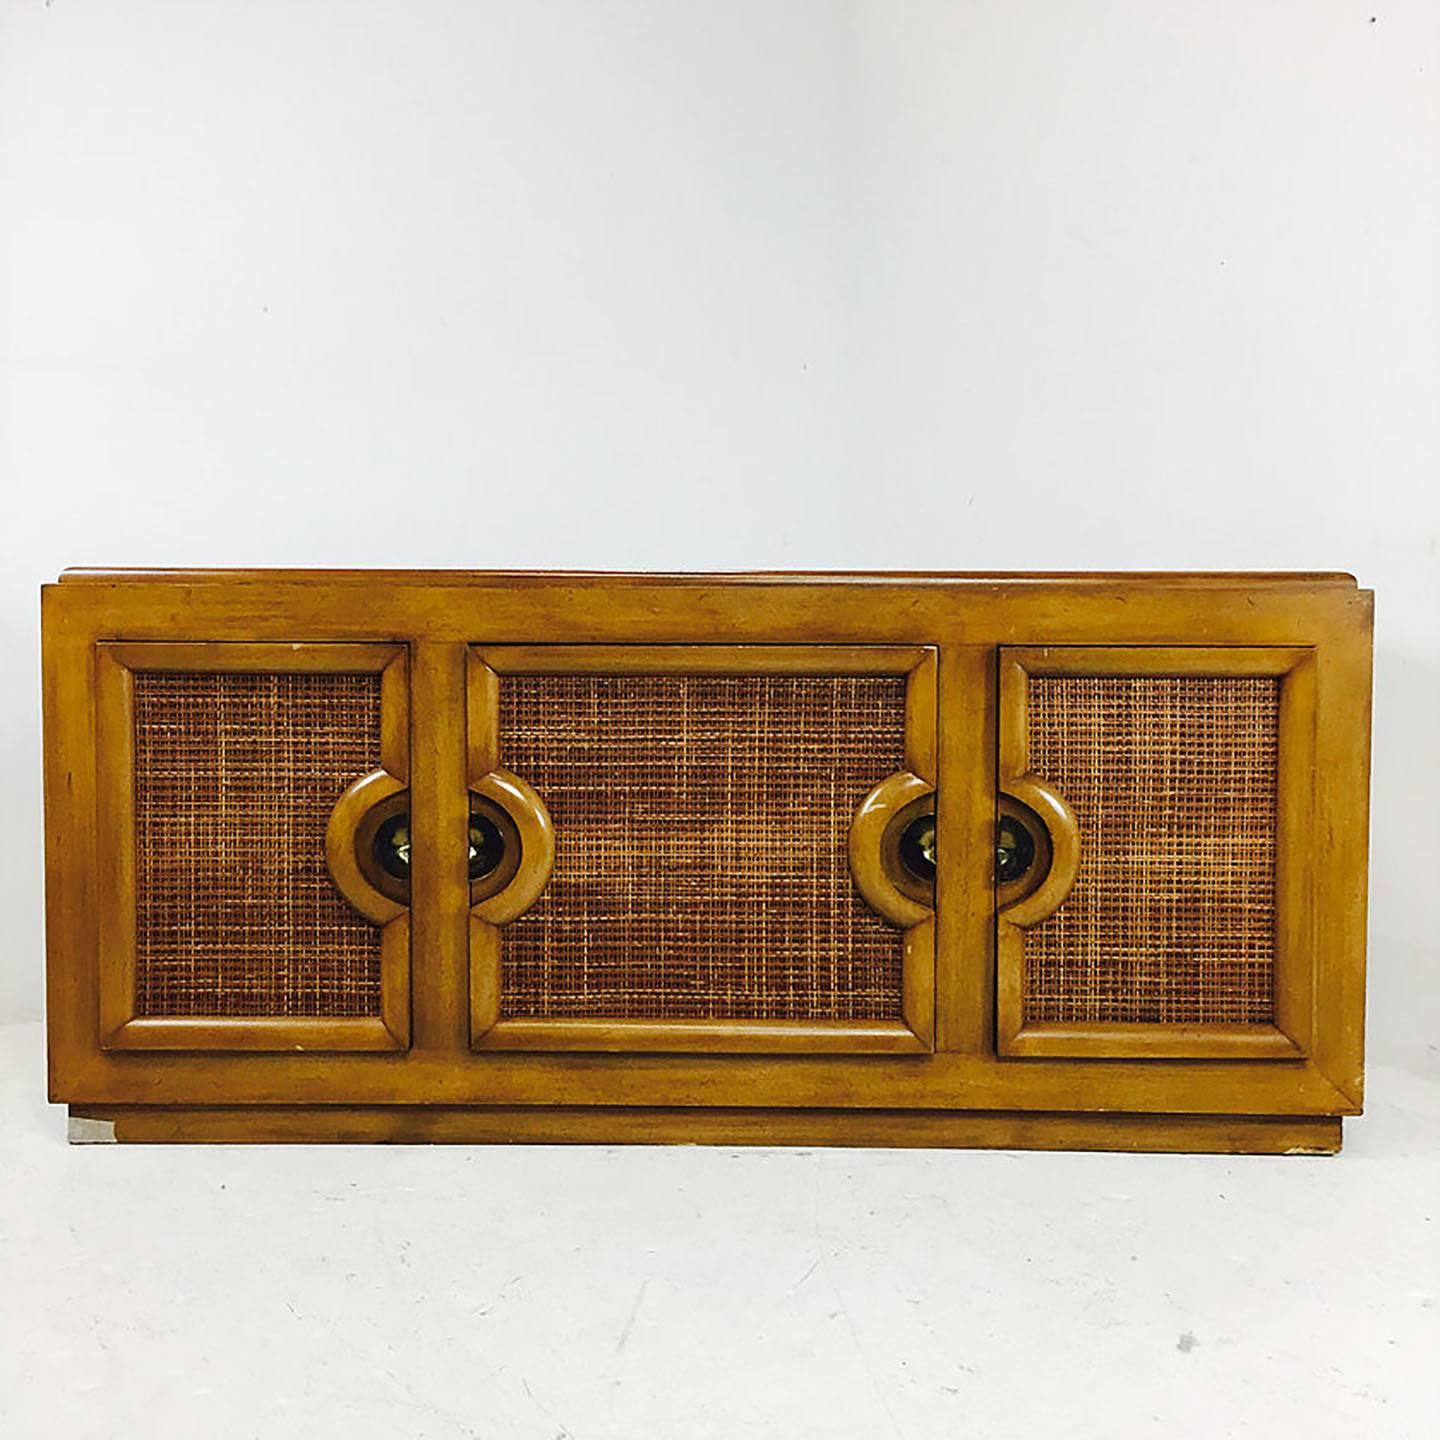 MCM three-door credenza for Brown Stewartstown Furniture Company. Refinishing is recommended for this pieces, circa 1960s

Dimensions: 72" wide x 19" deep x 32.5" tall.